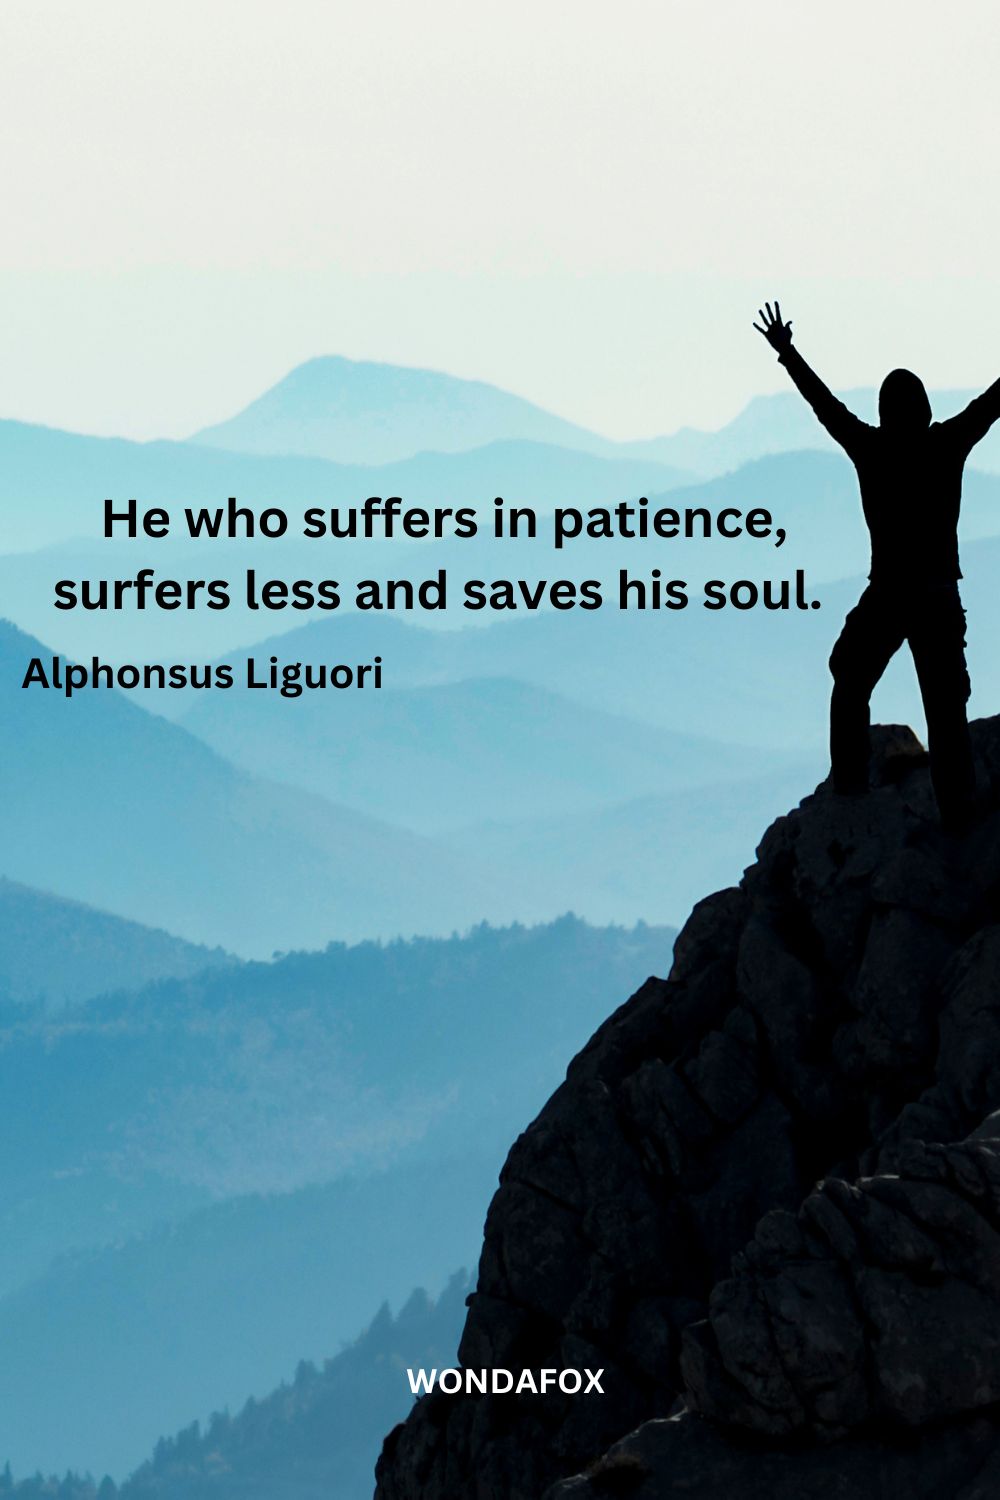  He who suffers in patience, surfers less and saves his soul.
Alphonsus Liguori